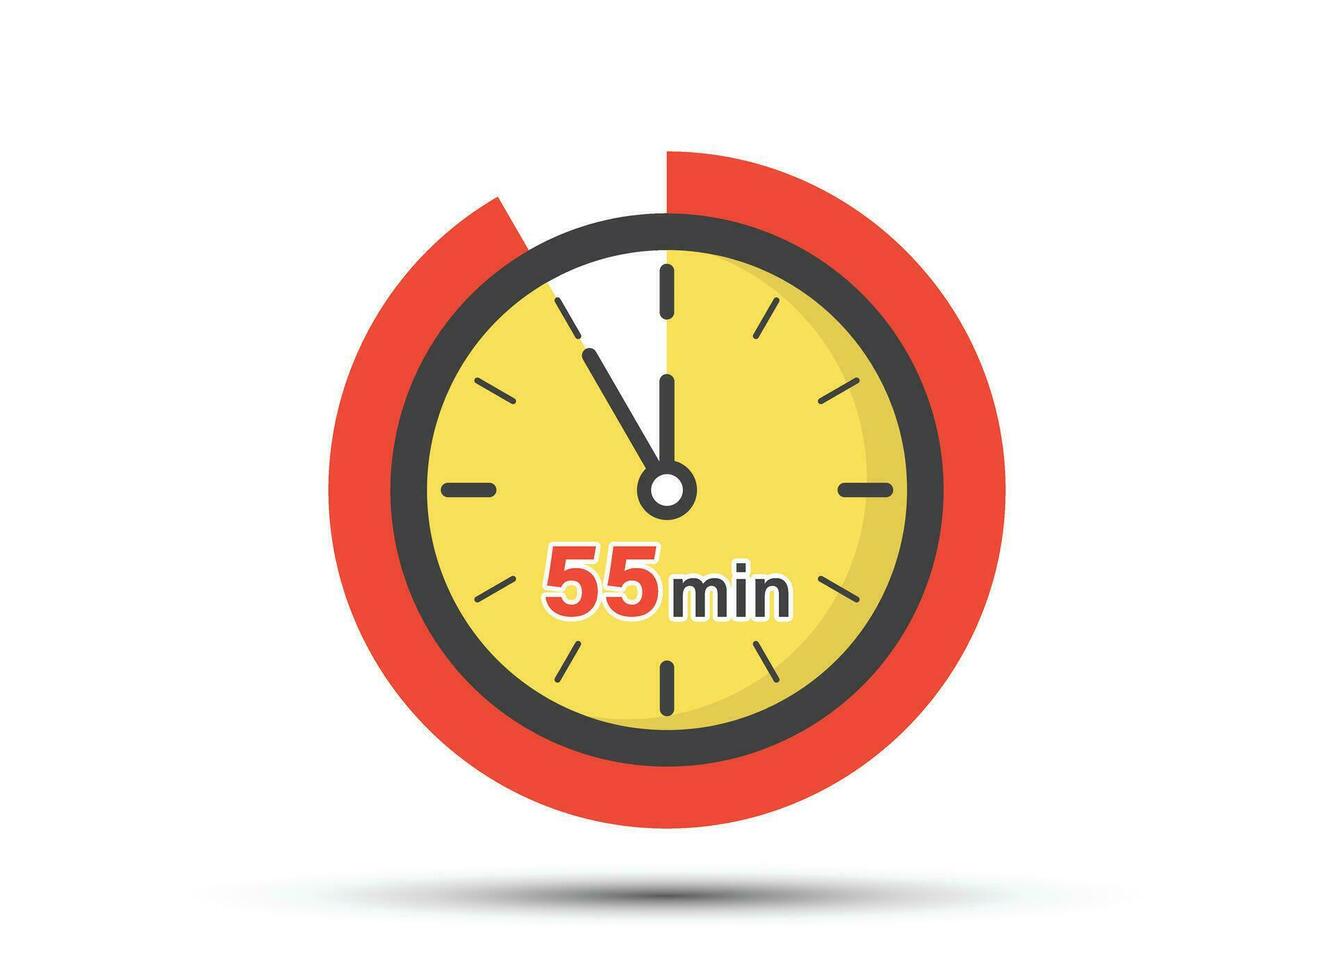 55 minutes on stopwatch icon in flat style. Clock face timer vector illustration on isolated background. Countdown sign business concept.